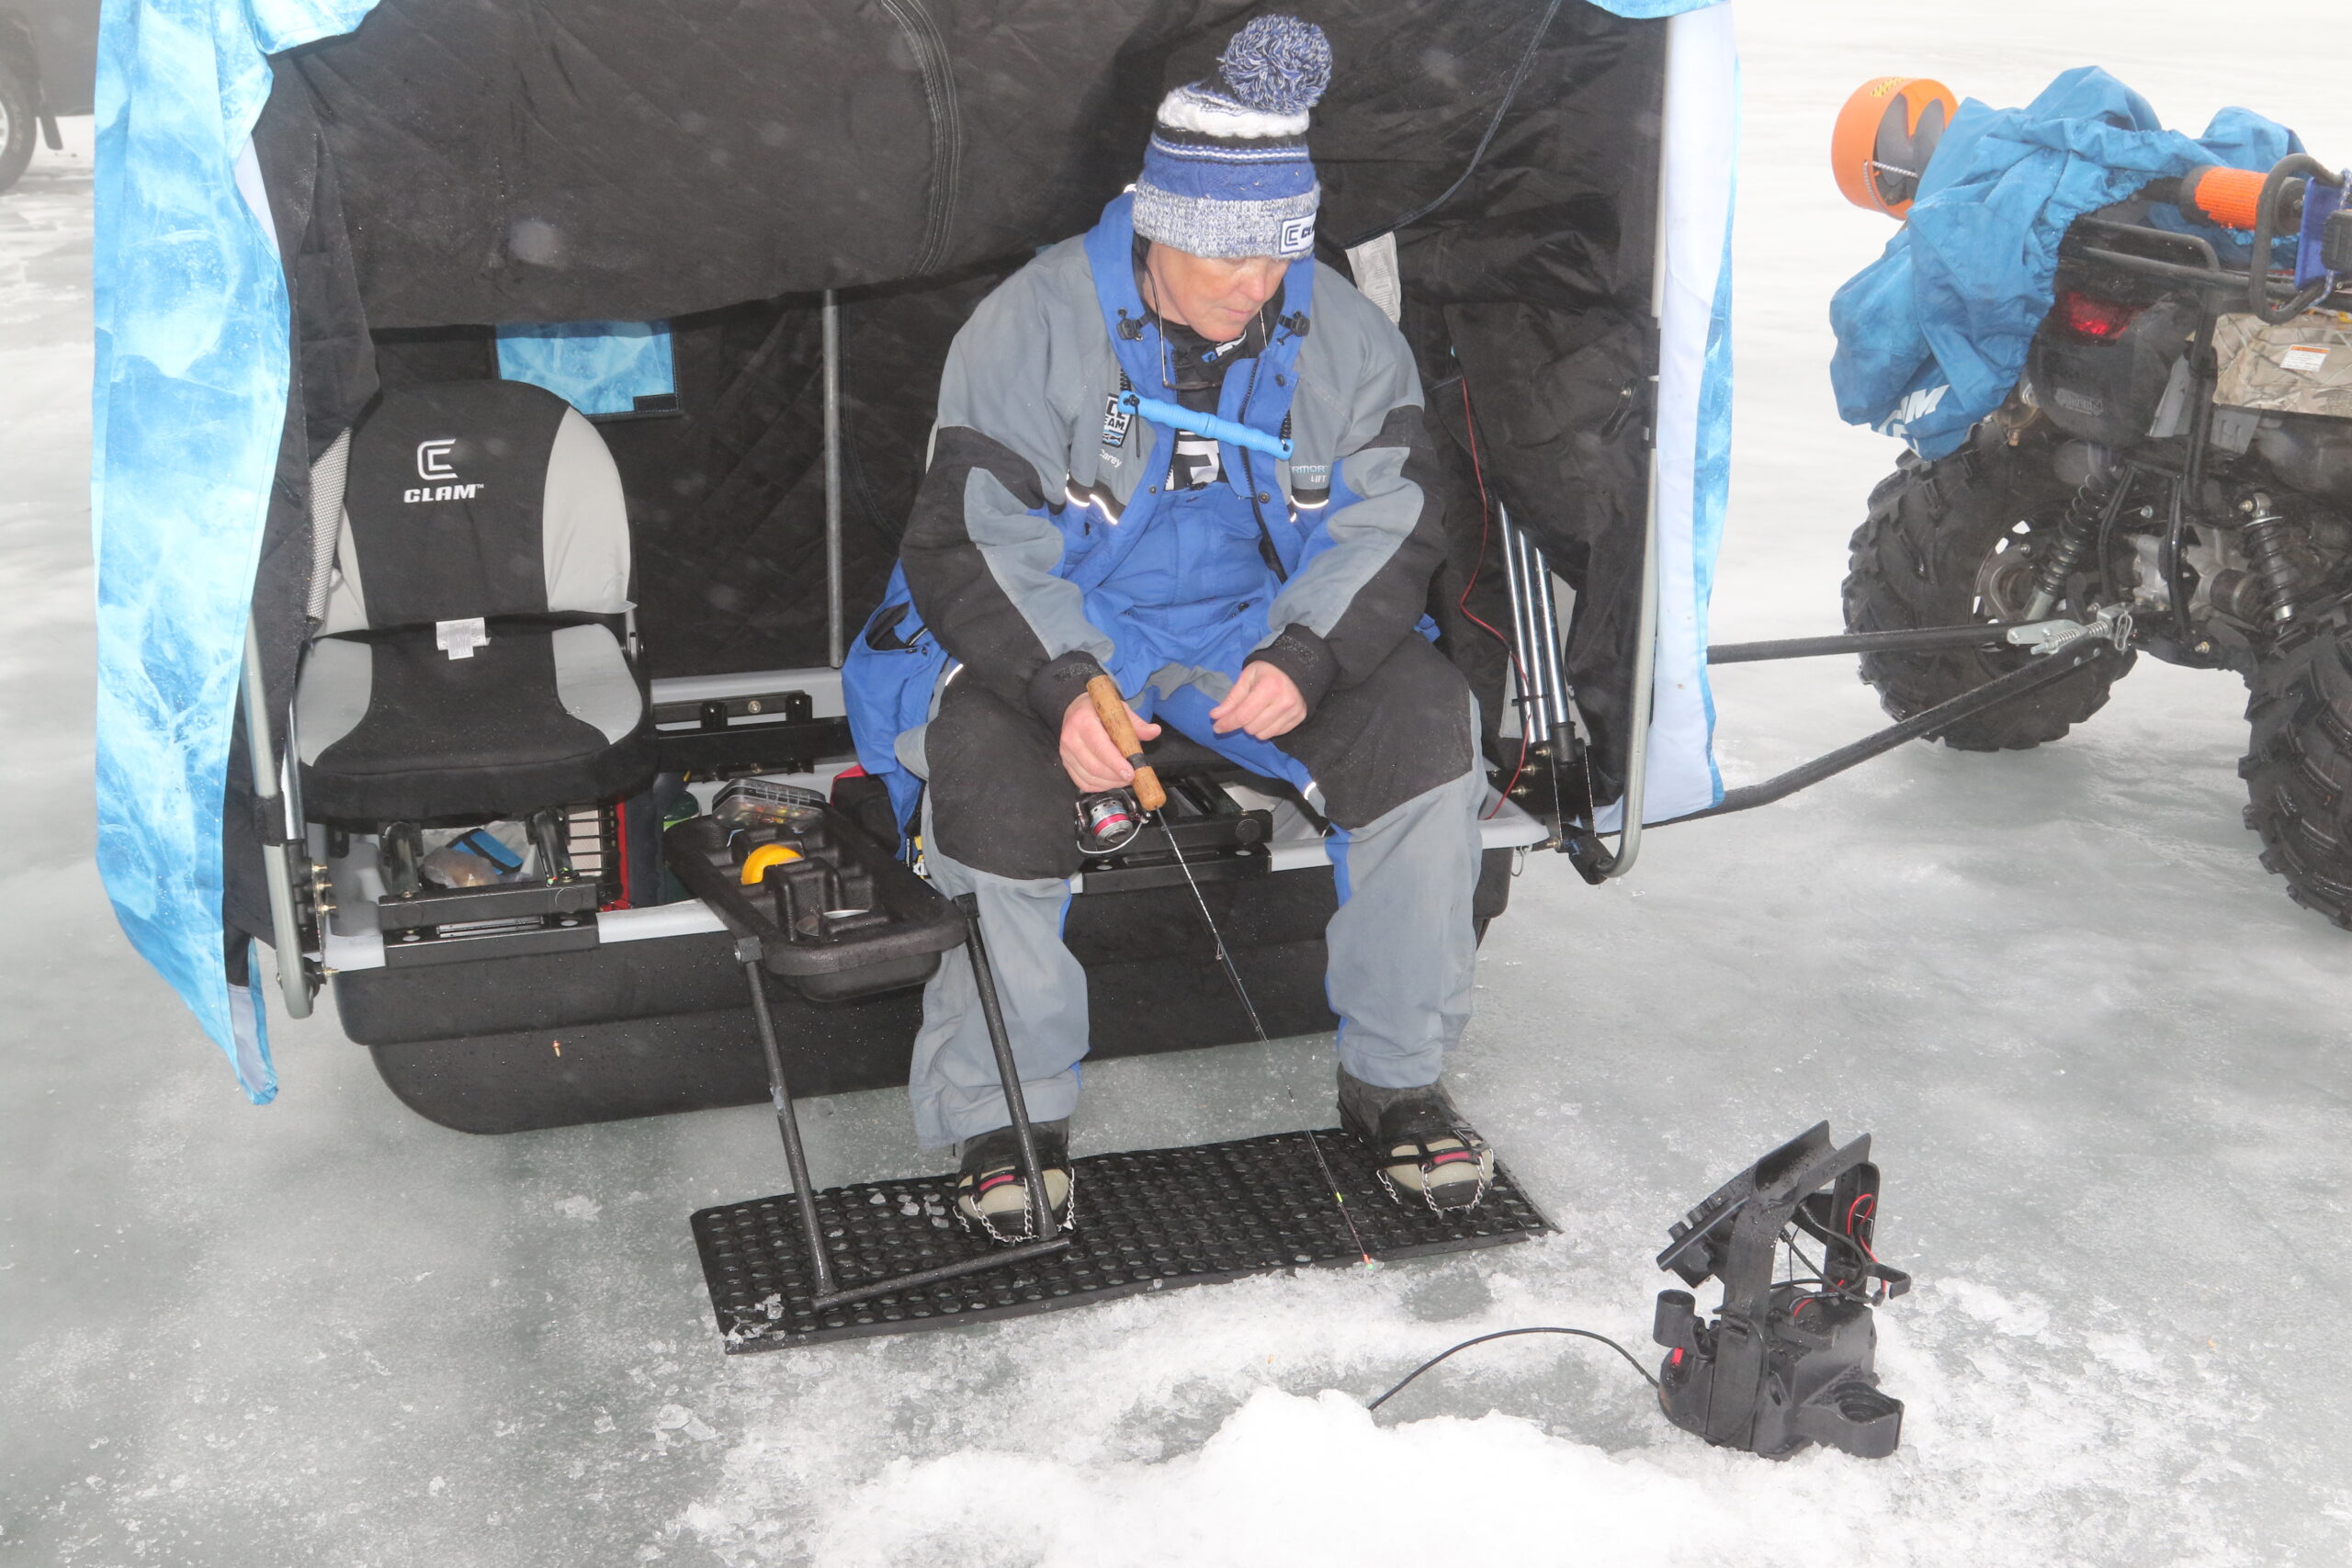 ice fishing accessories